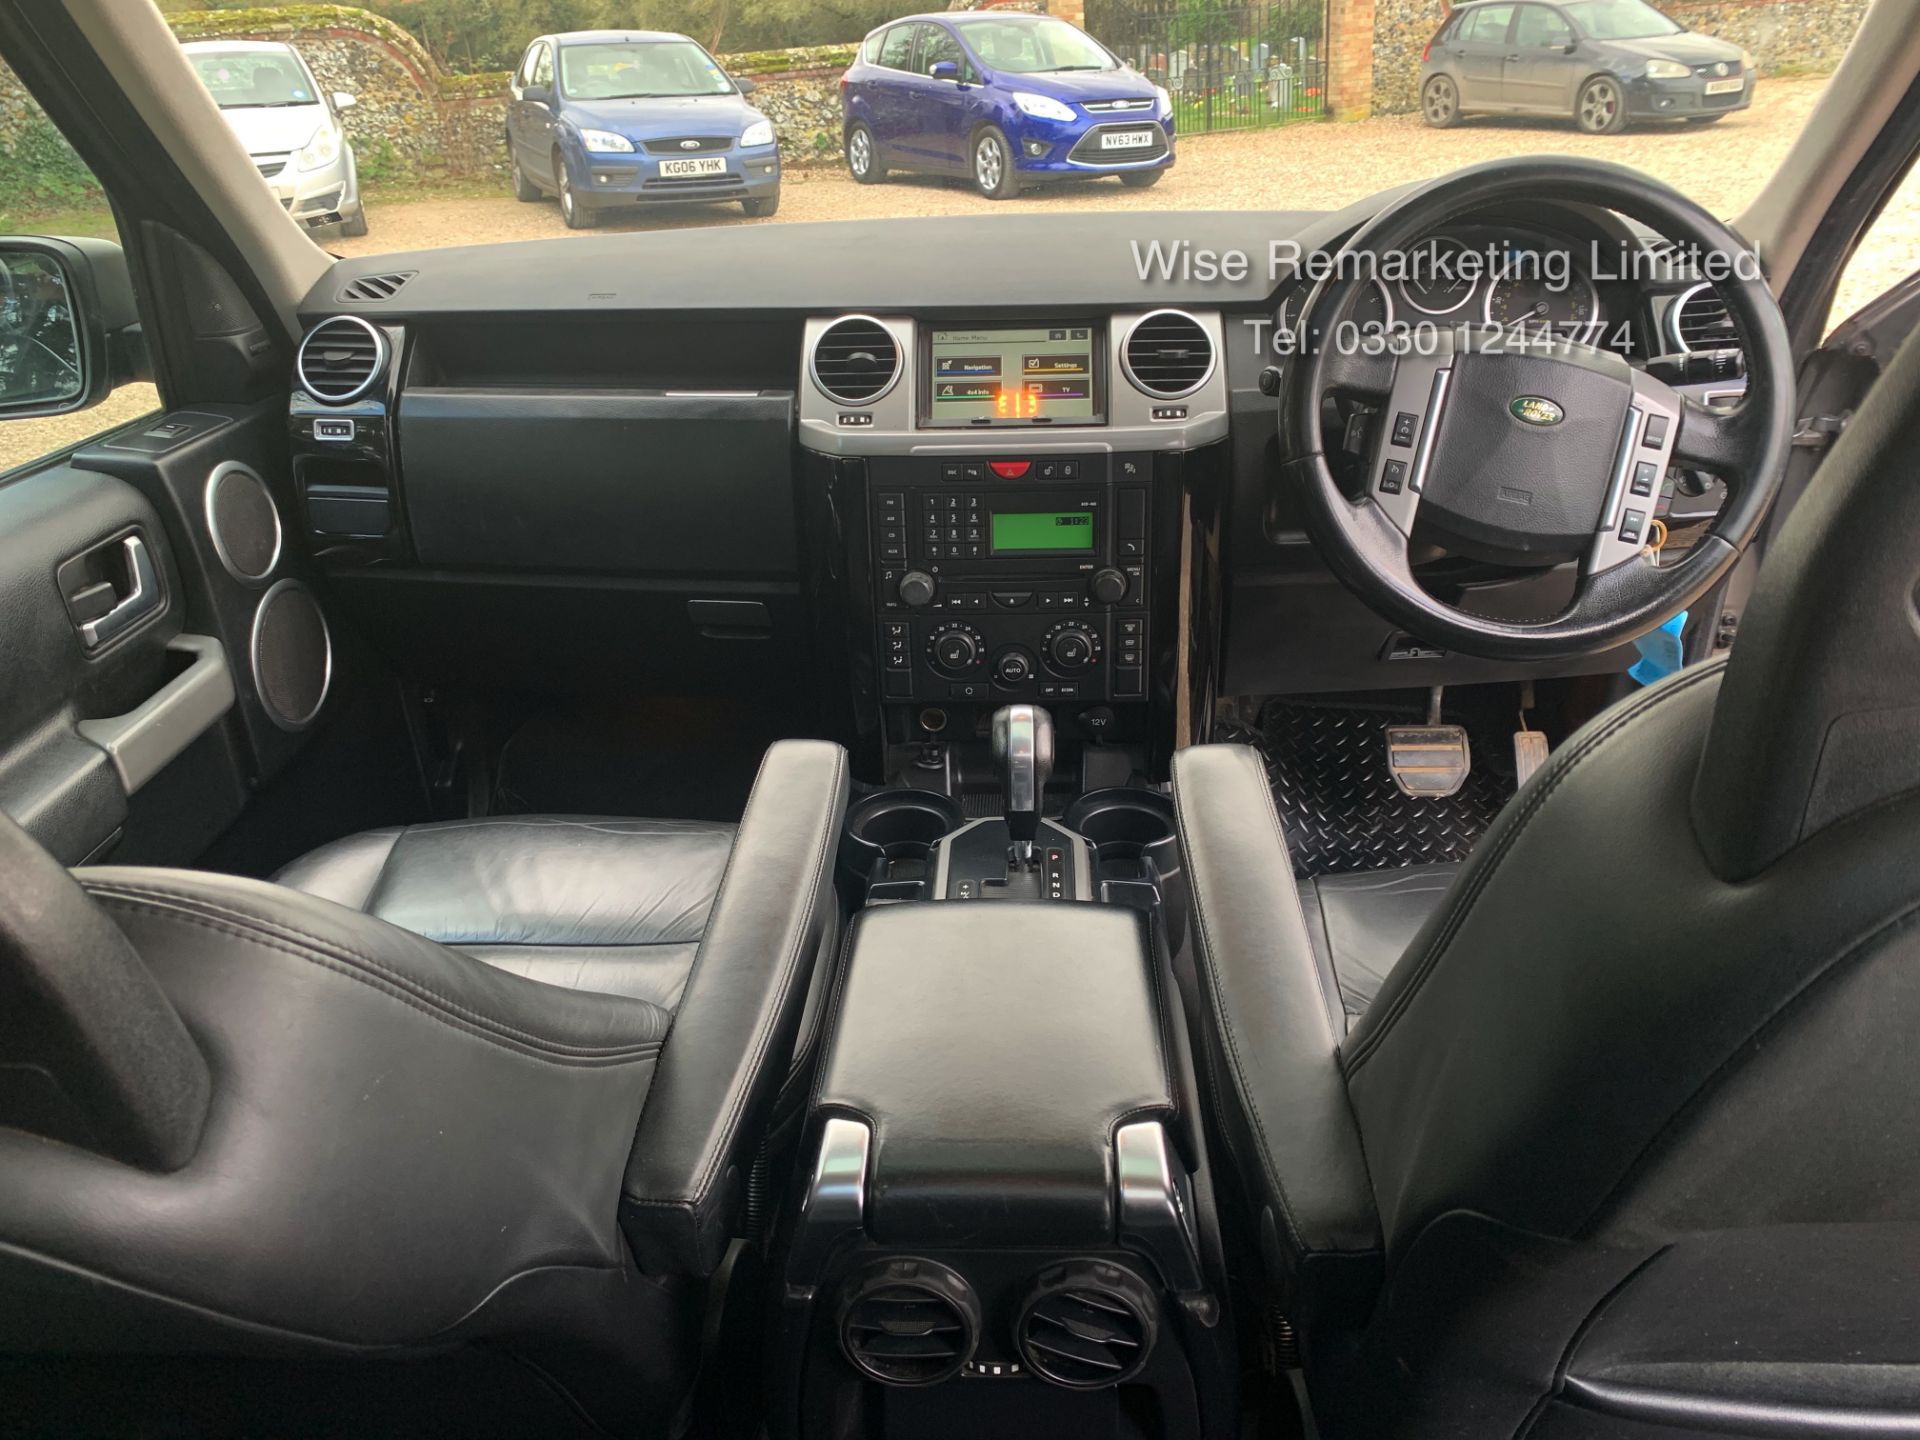 Land Rover Discovery 2.7 TDV6 HSE - Automatic - 2008 Reg - Full Leather - 7 Seater - Sat Nav - - Image 13 of 31